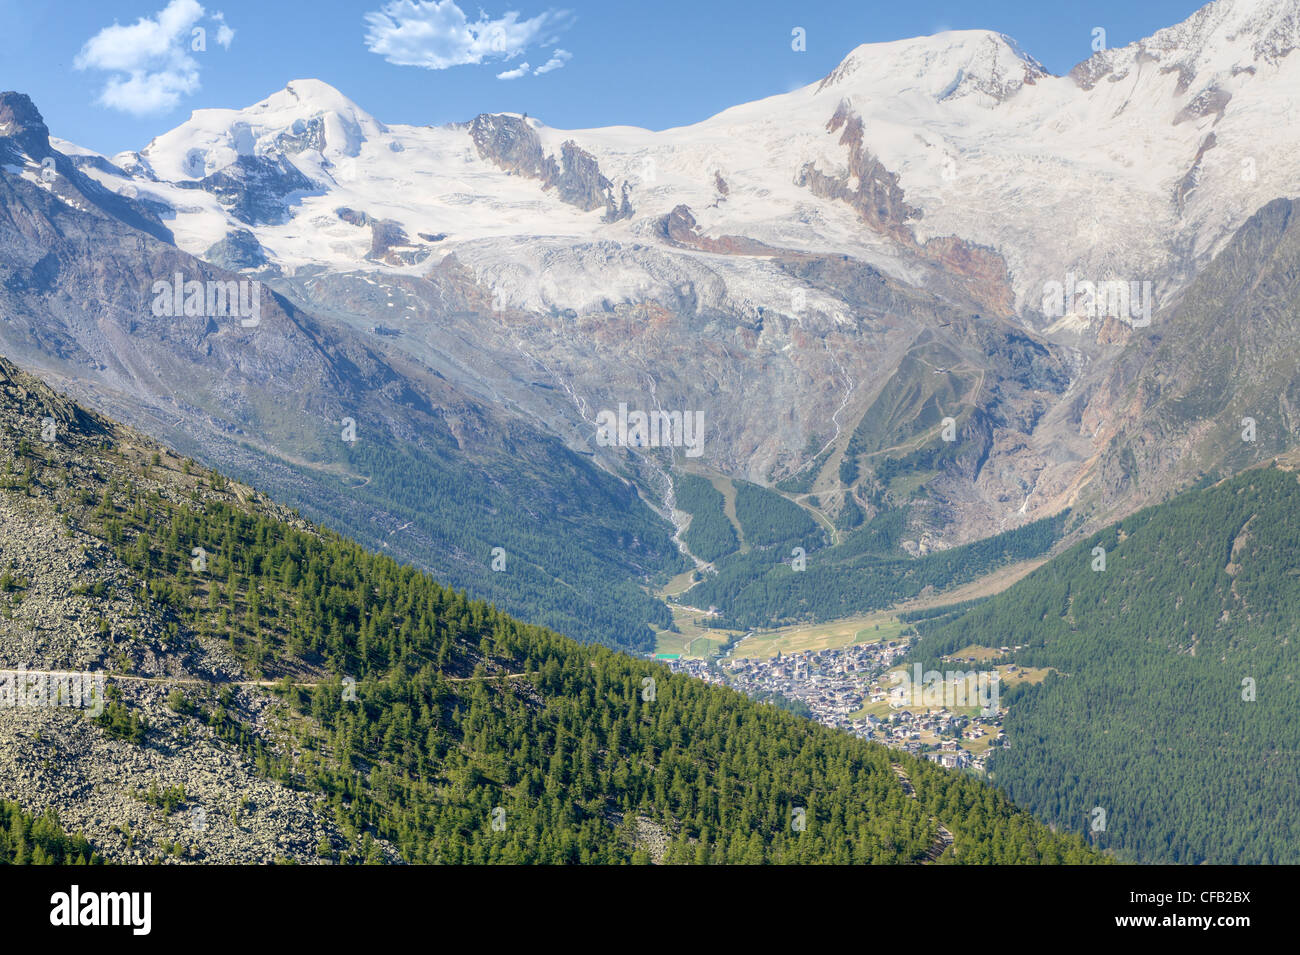 Alpine town of Saas Fee in Saas valley surrounded by high mountains, Vailais, Switzerland Stock Photo